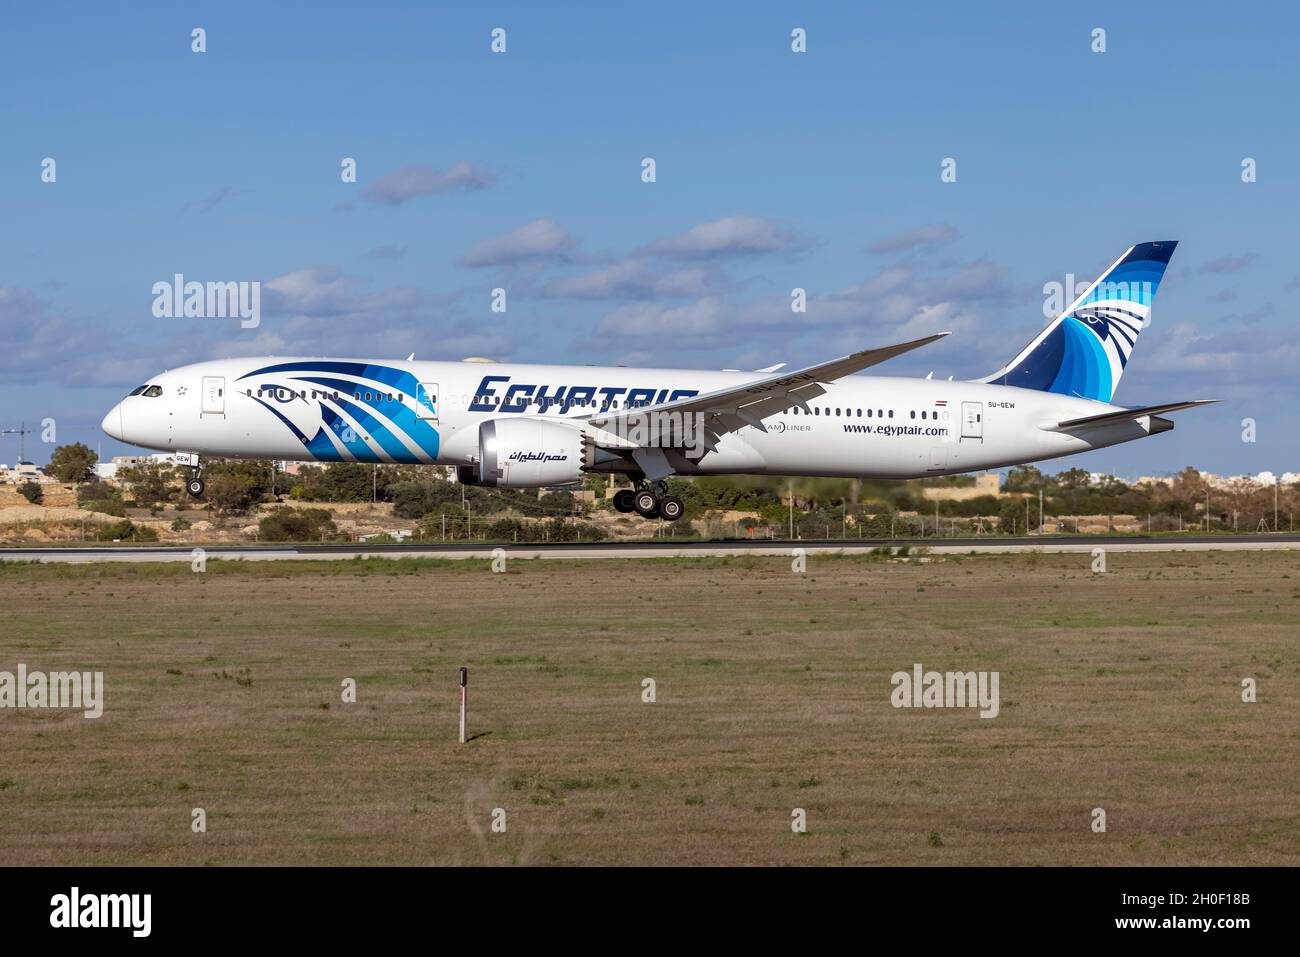 EgyptAir Boeing 787-9 Dreamliner (REG: SU-GEW) performing a cargo only flight from and to Cairo. Stock Photo